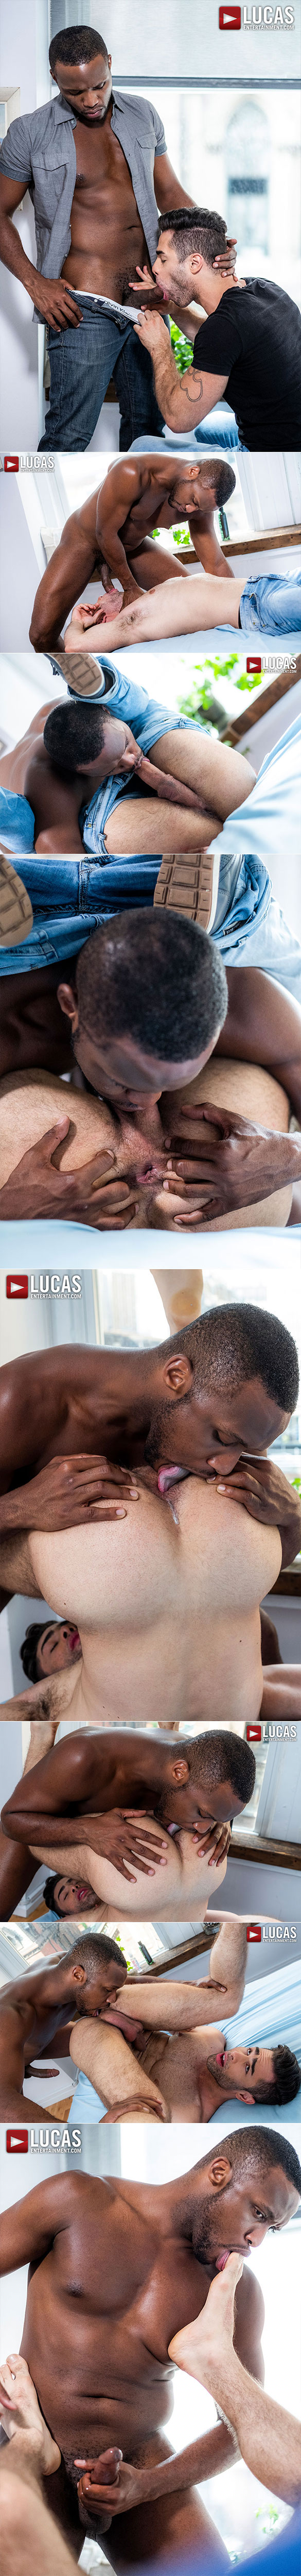 Lucas Entertainment: Lucas Leon gets fucked raw by Andre Donovan in "Big Black Dicks"